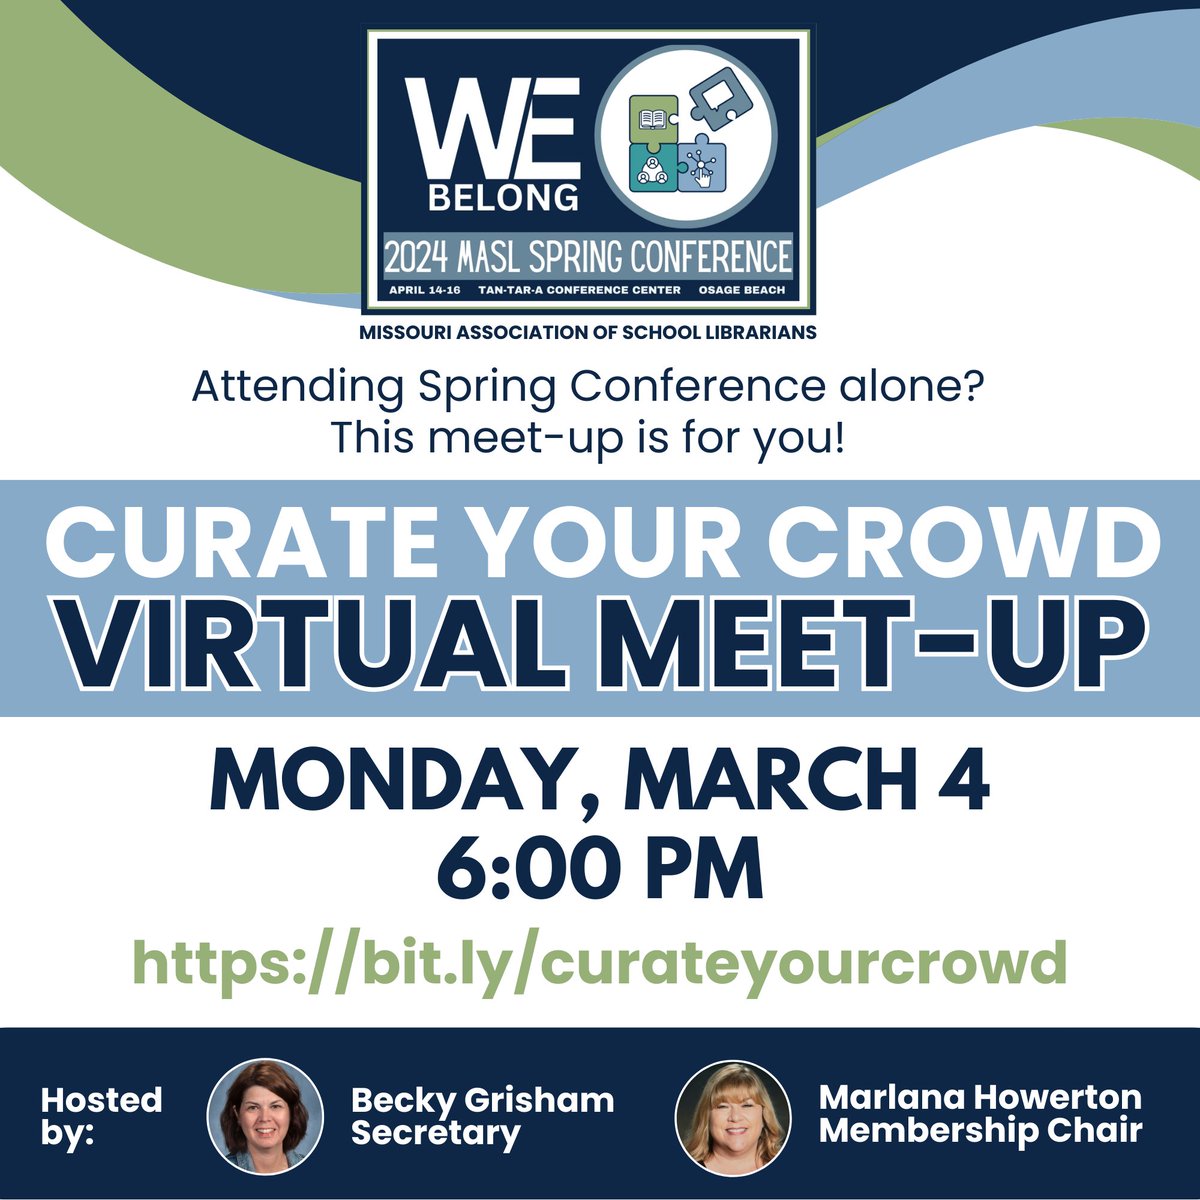 Are you attending MASL Spring Conference solo? Join the virtual meet-up TODAY, March 4 at 6:00pm by visiting: bit.ly/curateyourcrowd